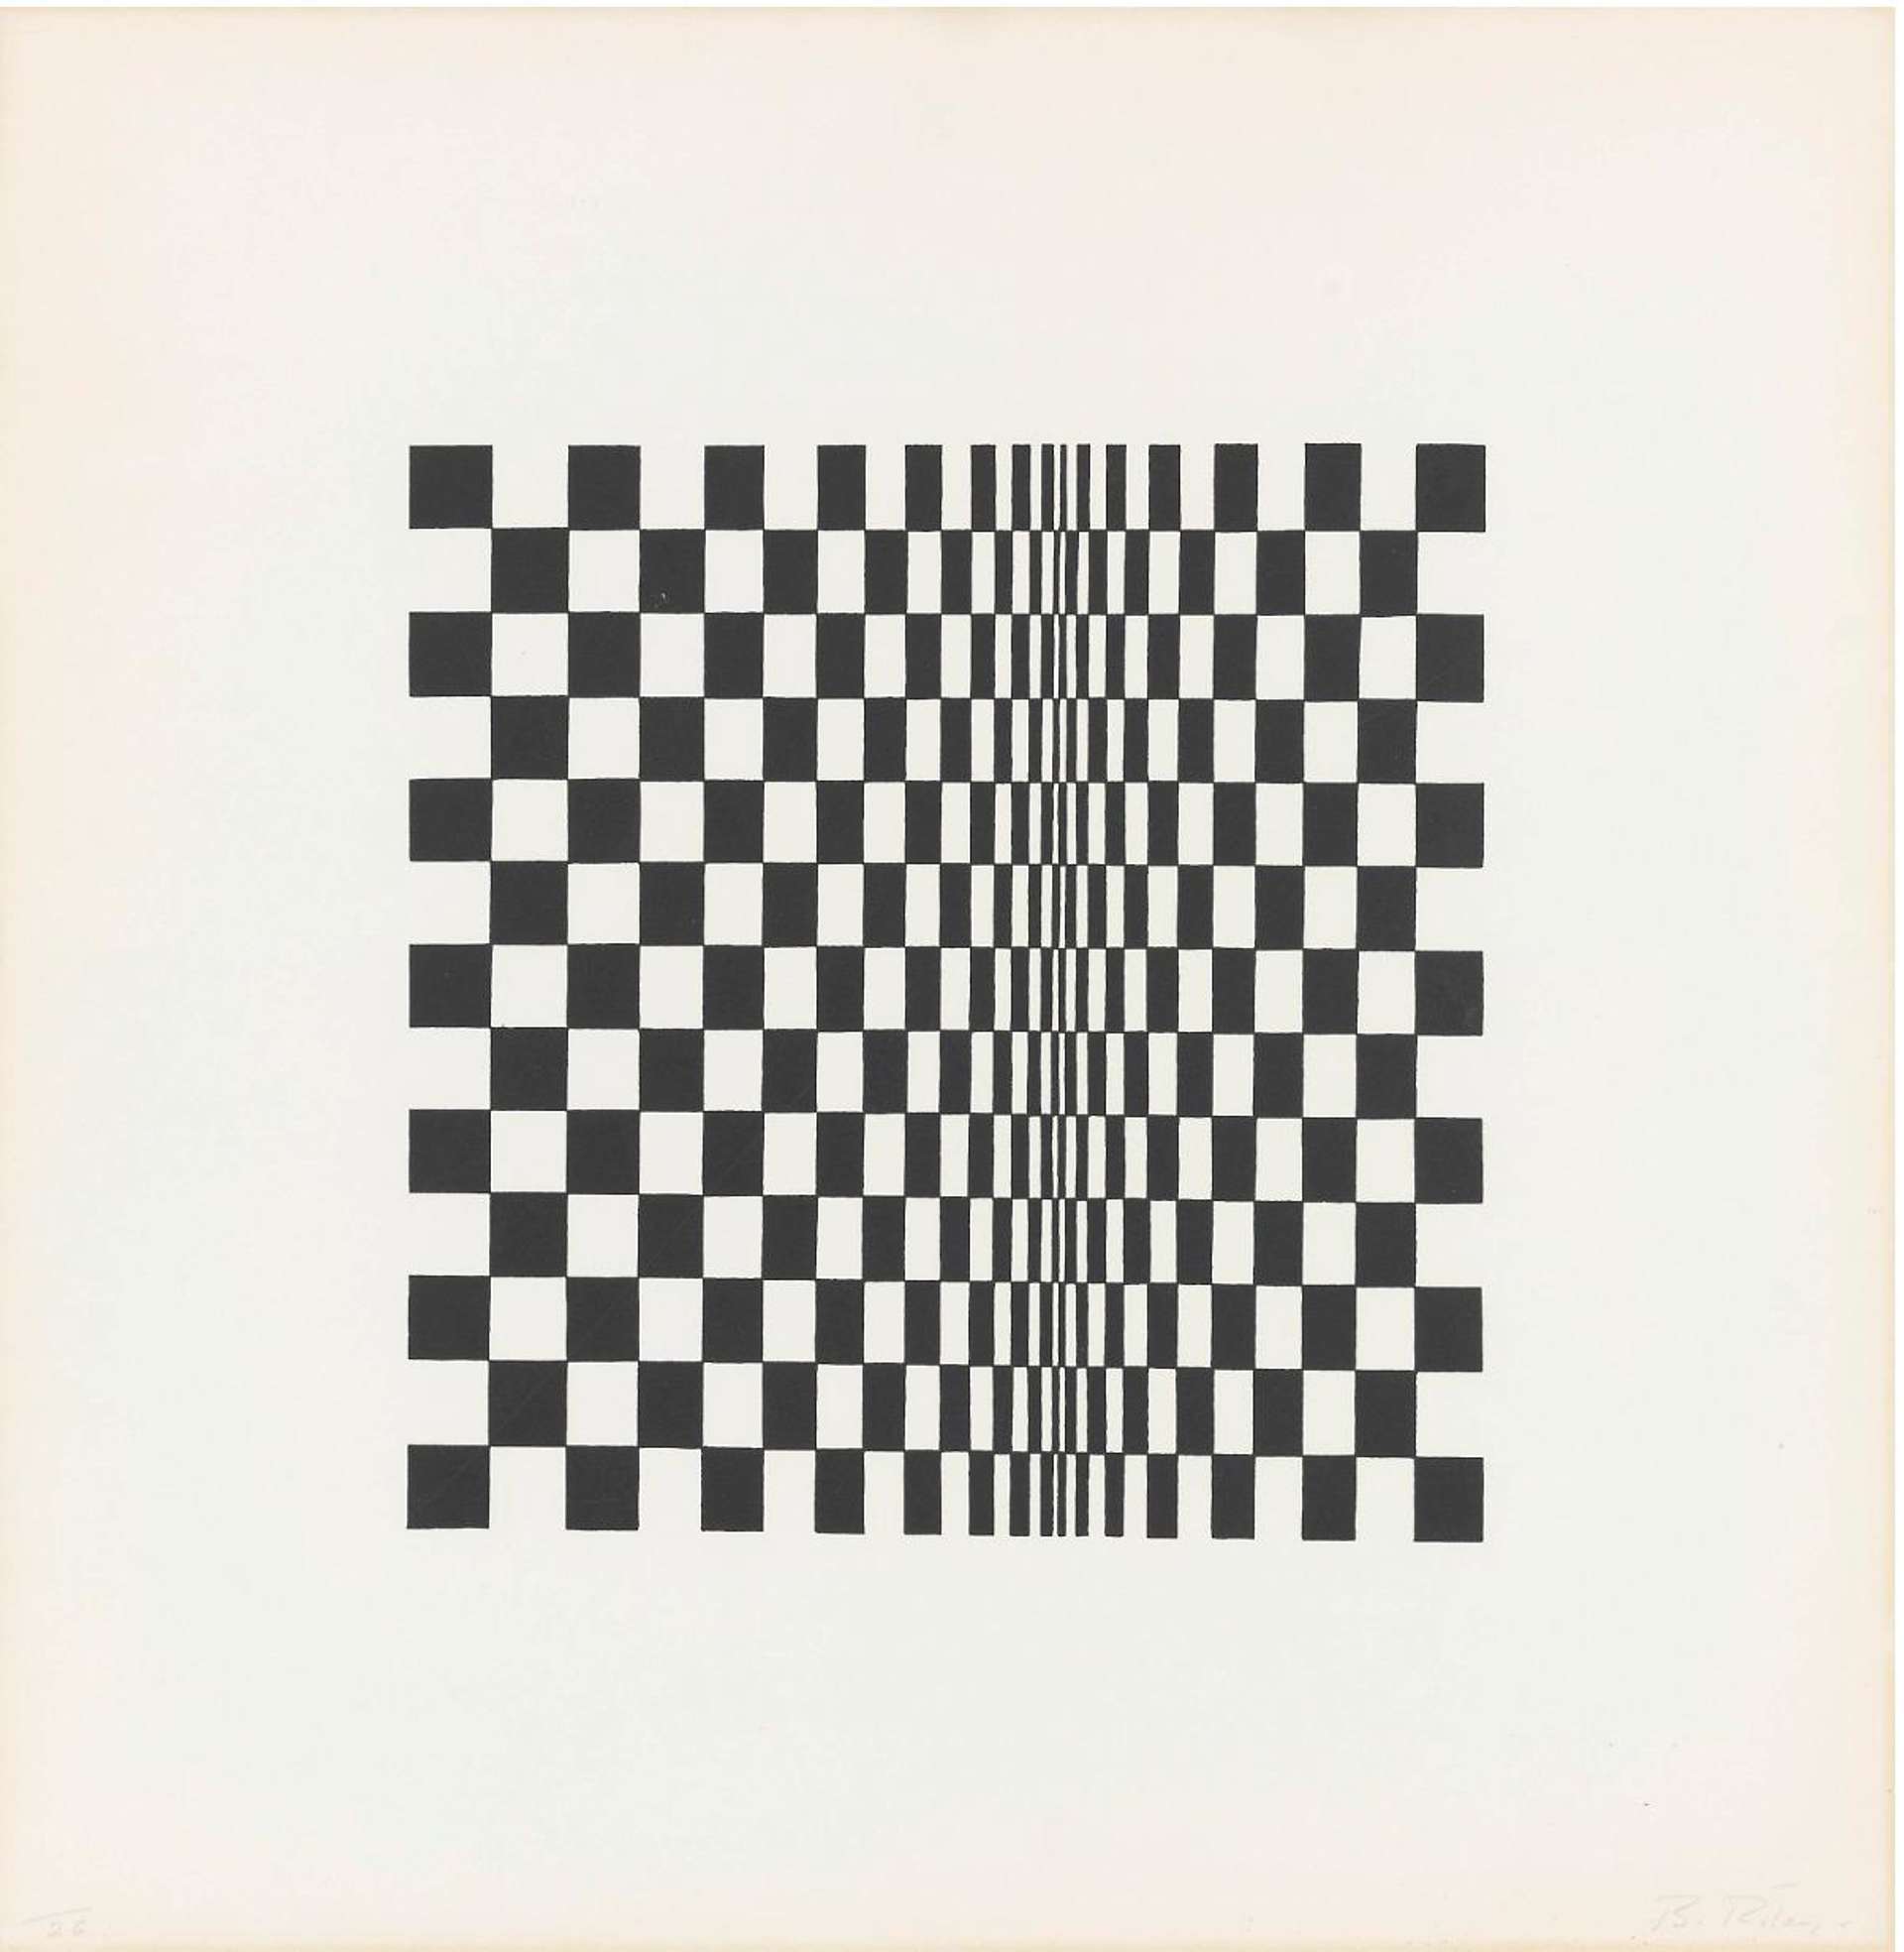 A screenprint by Bridget Riley in black and white, depicting an optical illusion made with a pattern of squares to give the impression that the squares are curving into the composition.